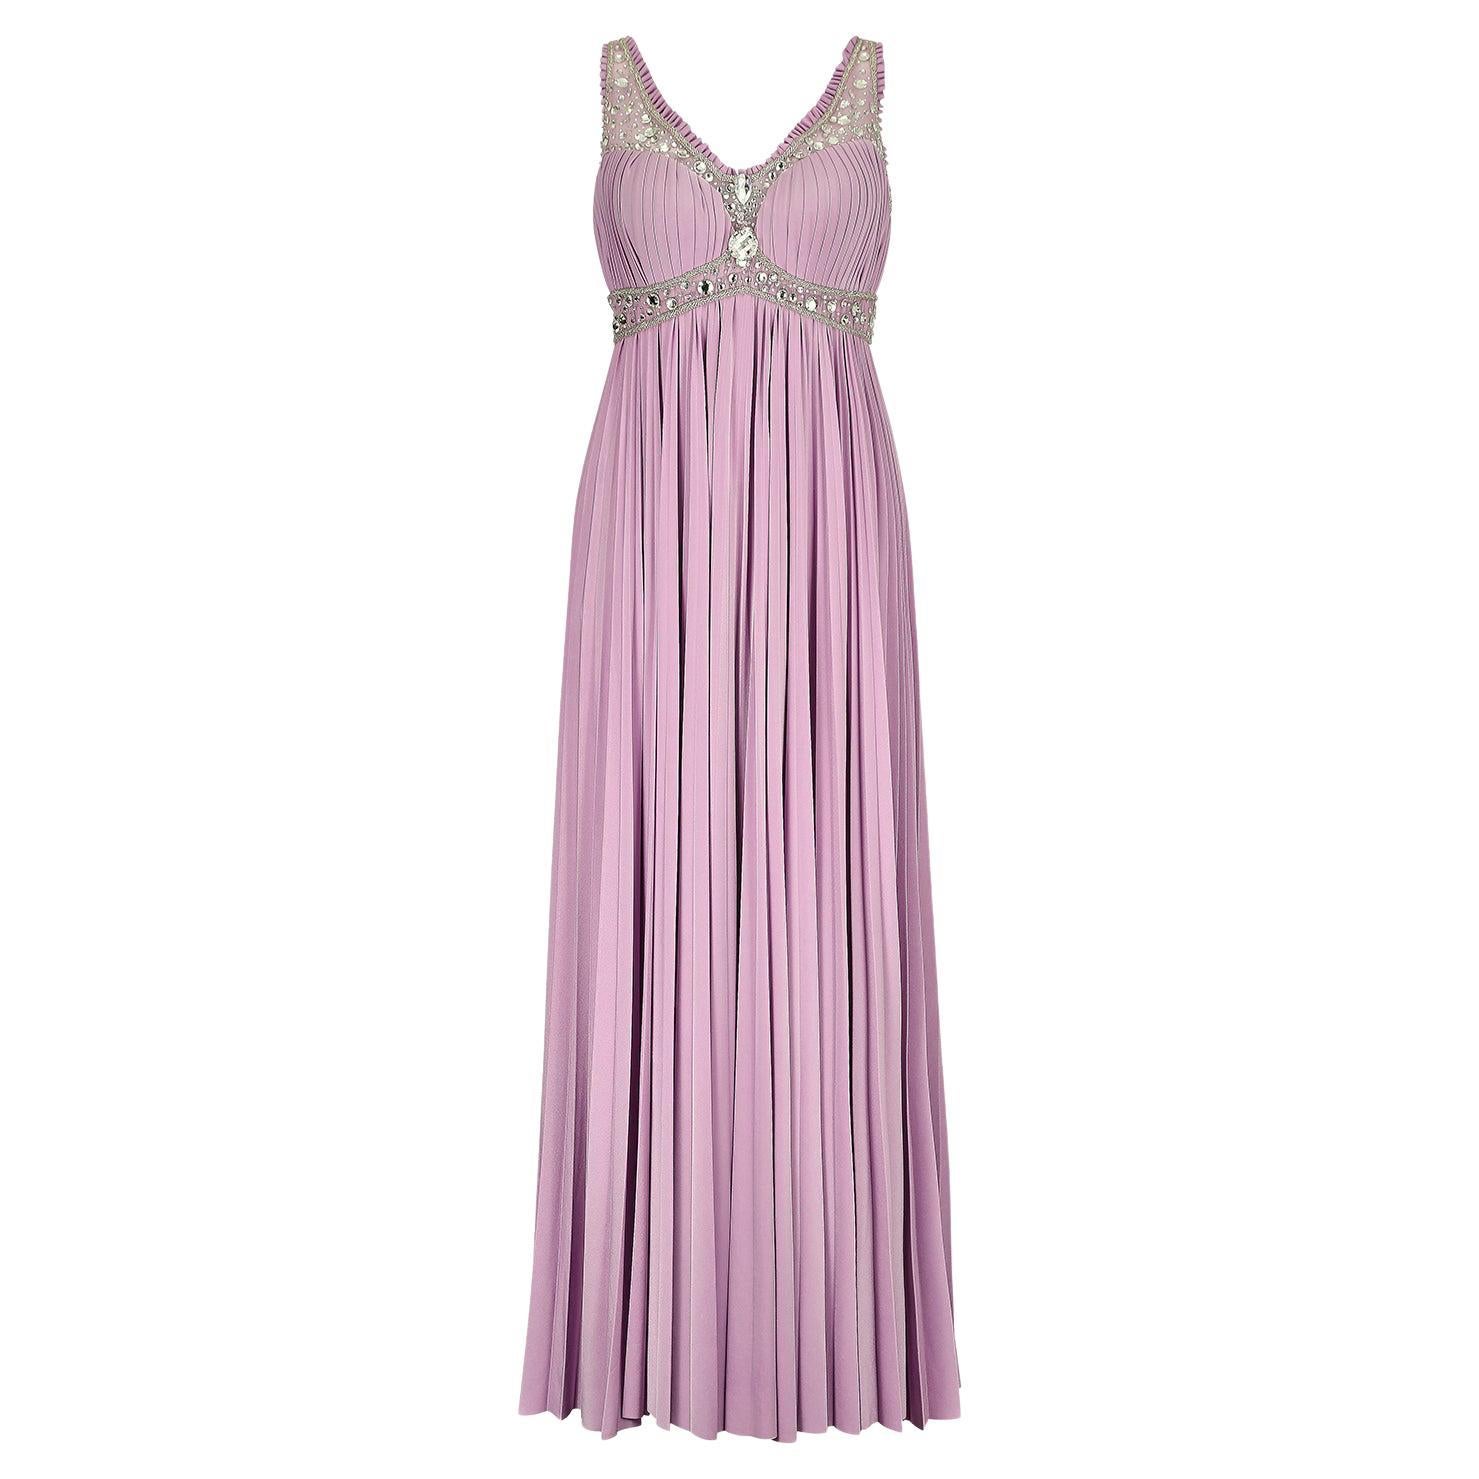 1990s Bespoke Lilac Crystal-Embellished Gown For Sale at 1stDibs